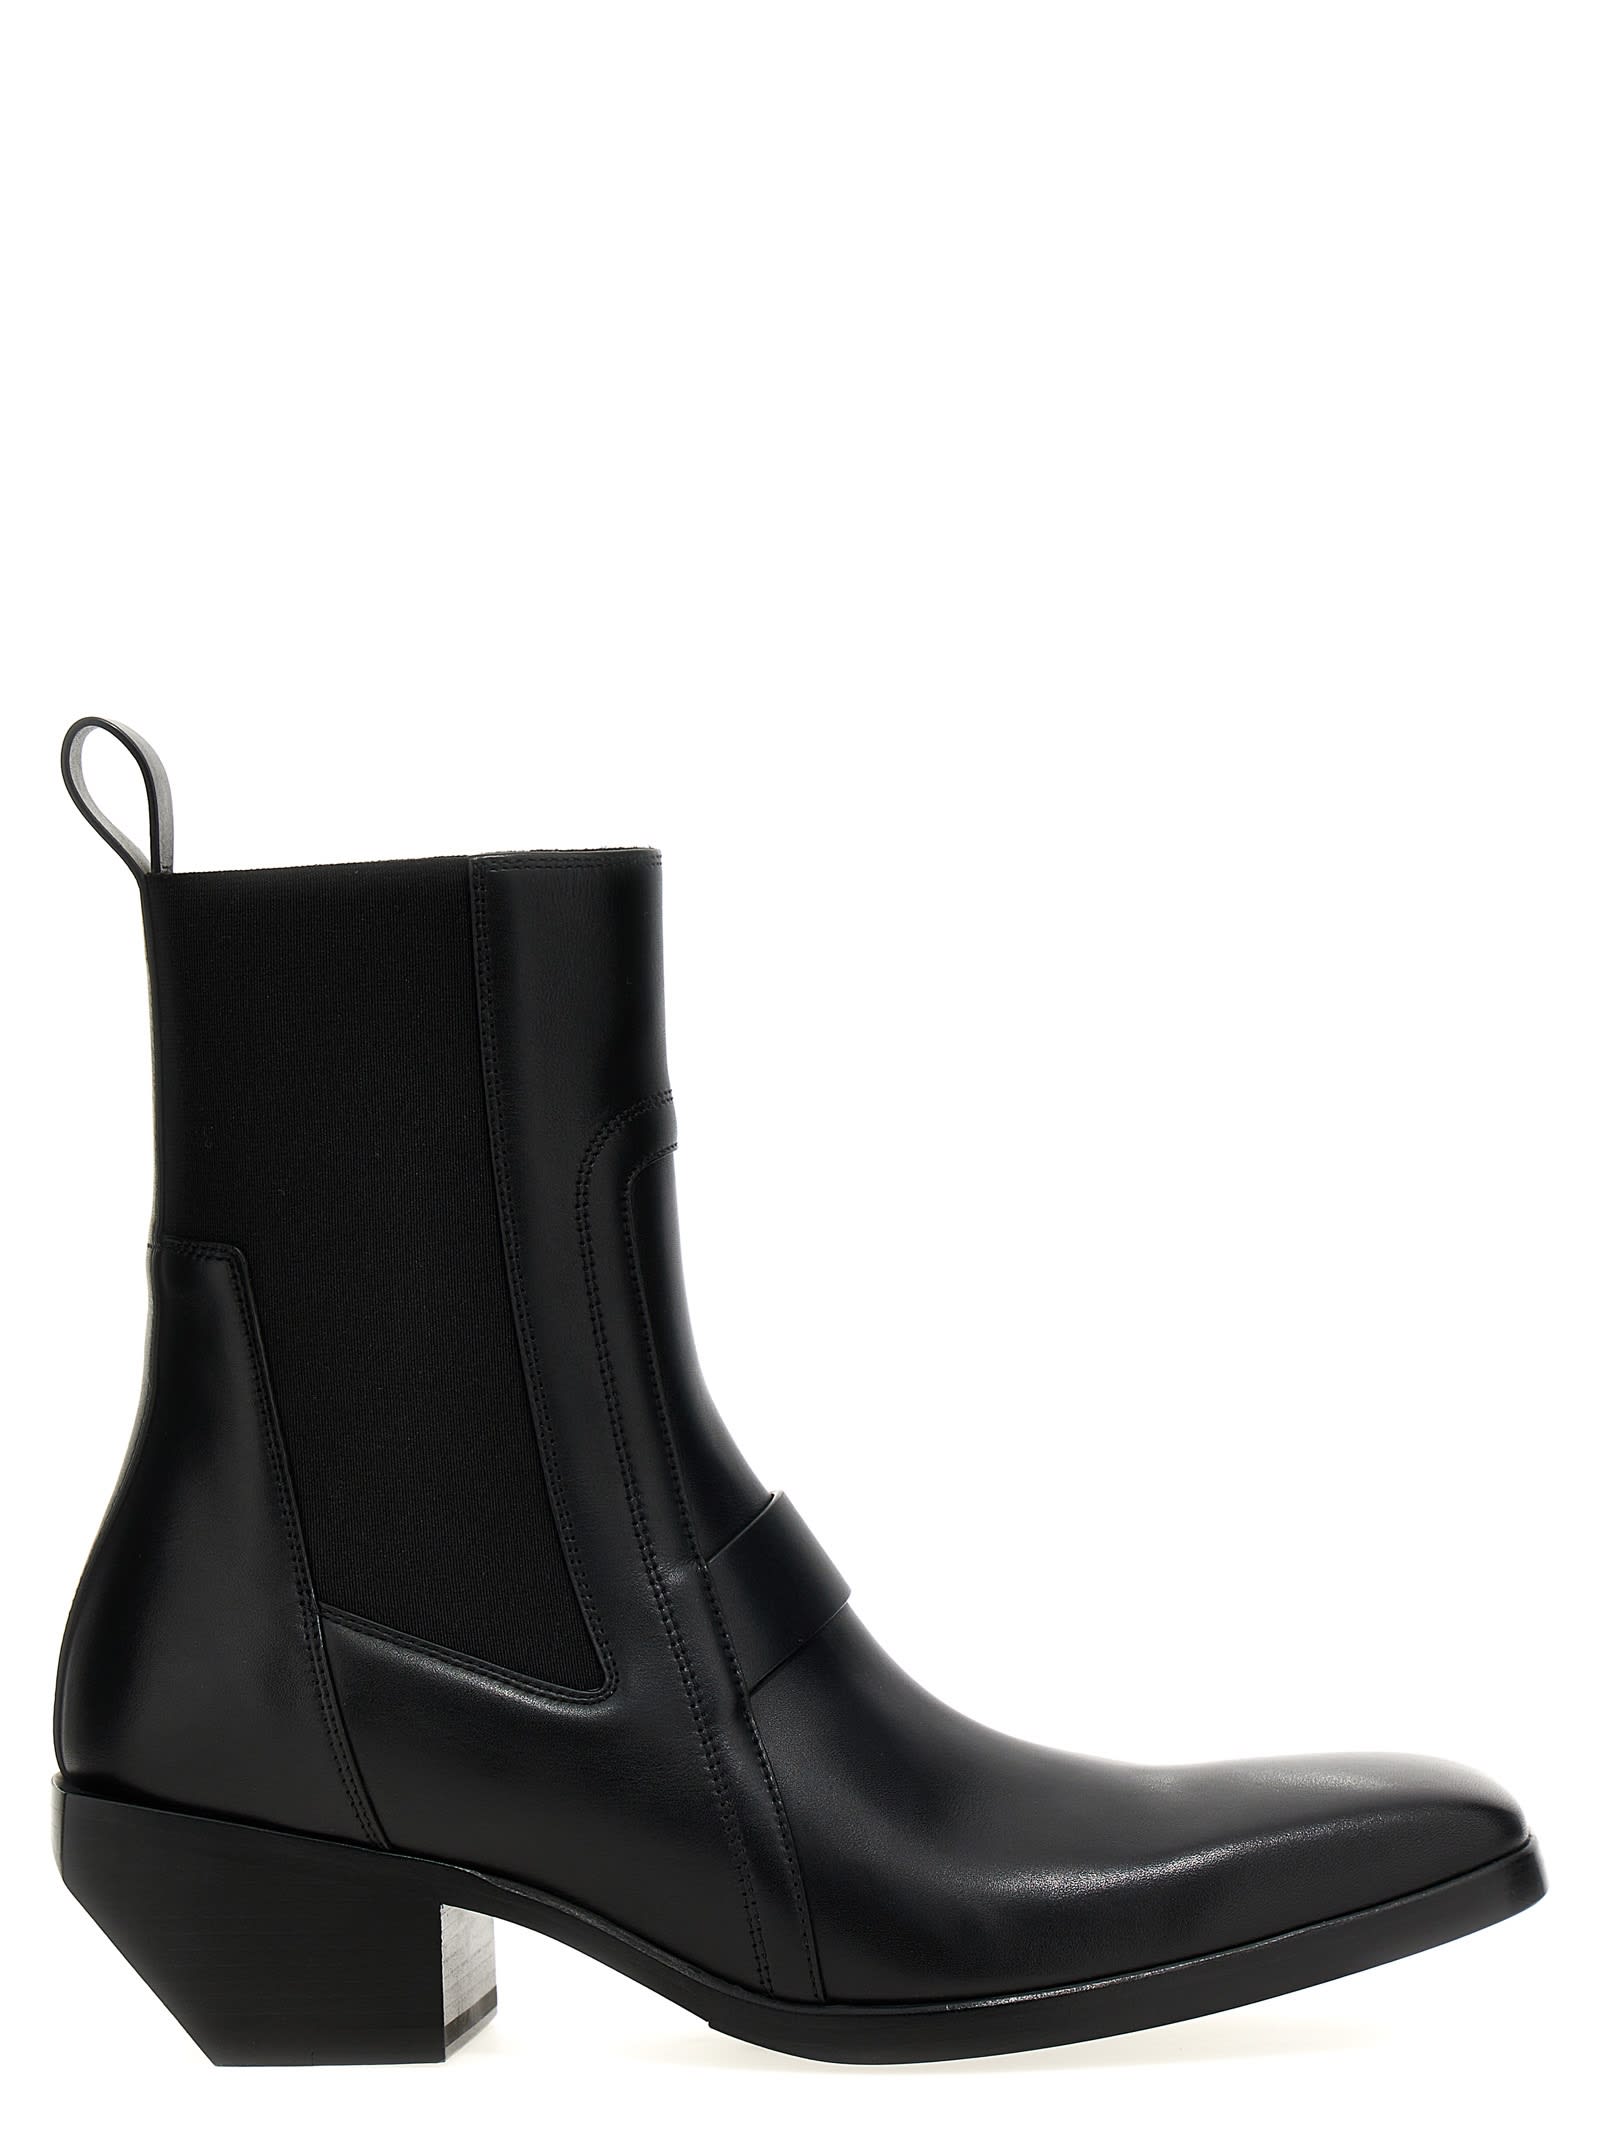 RICK OWENS HEELED SILVER BOOTS